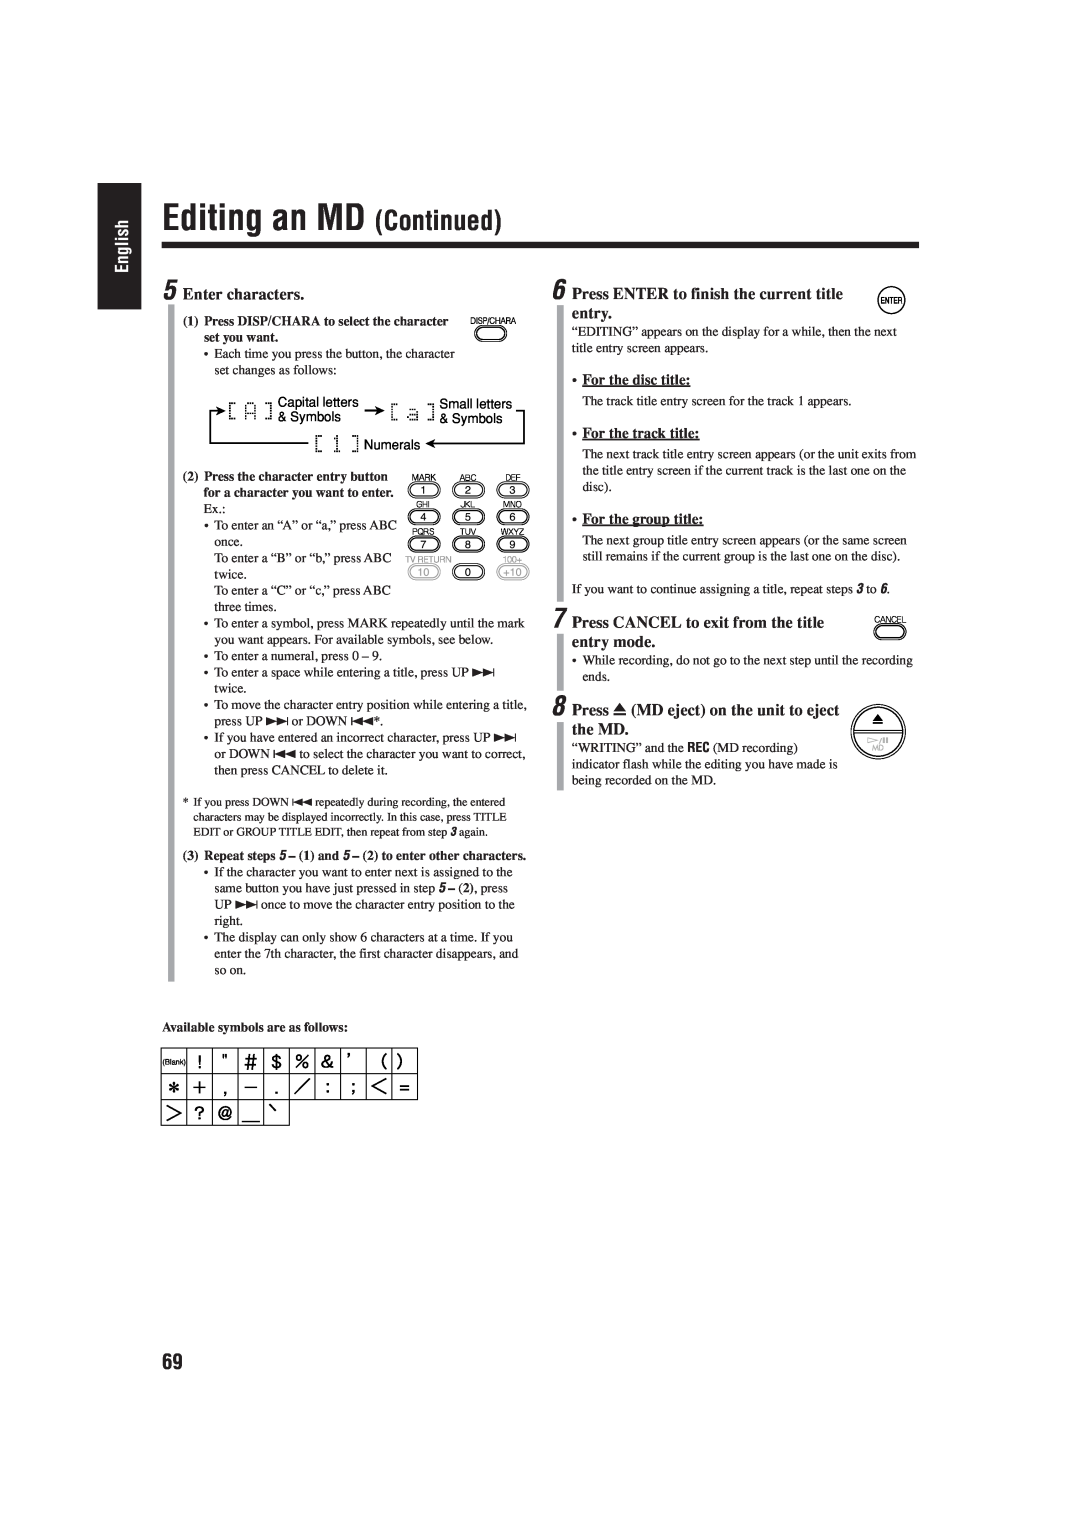 JVC UX-J99DVD manual Enter characters, Press ENTER to finish the current title entry, Press 0 MD eject on the unit to eject 